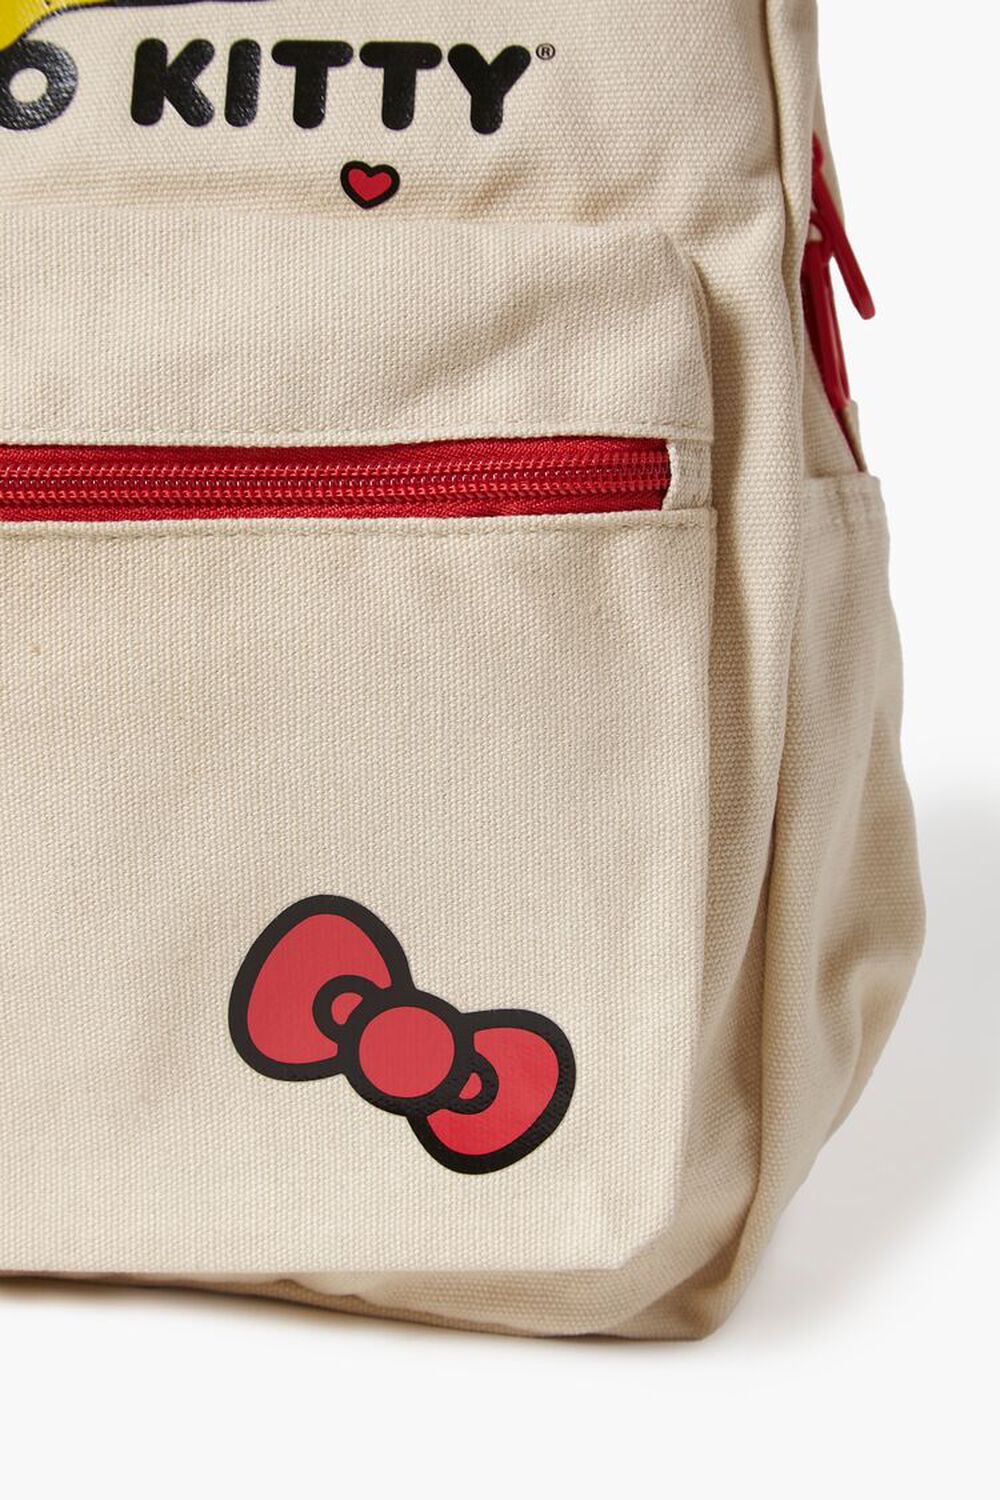 Hello Kitty Backpack for Adults